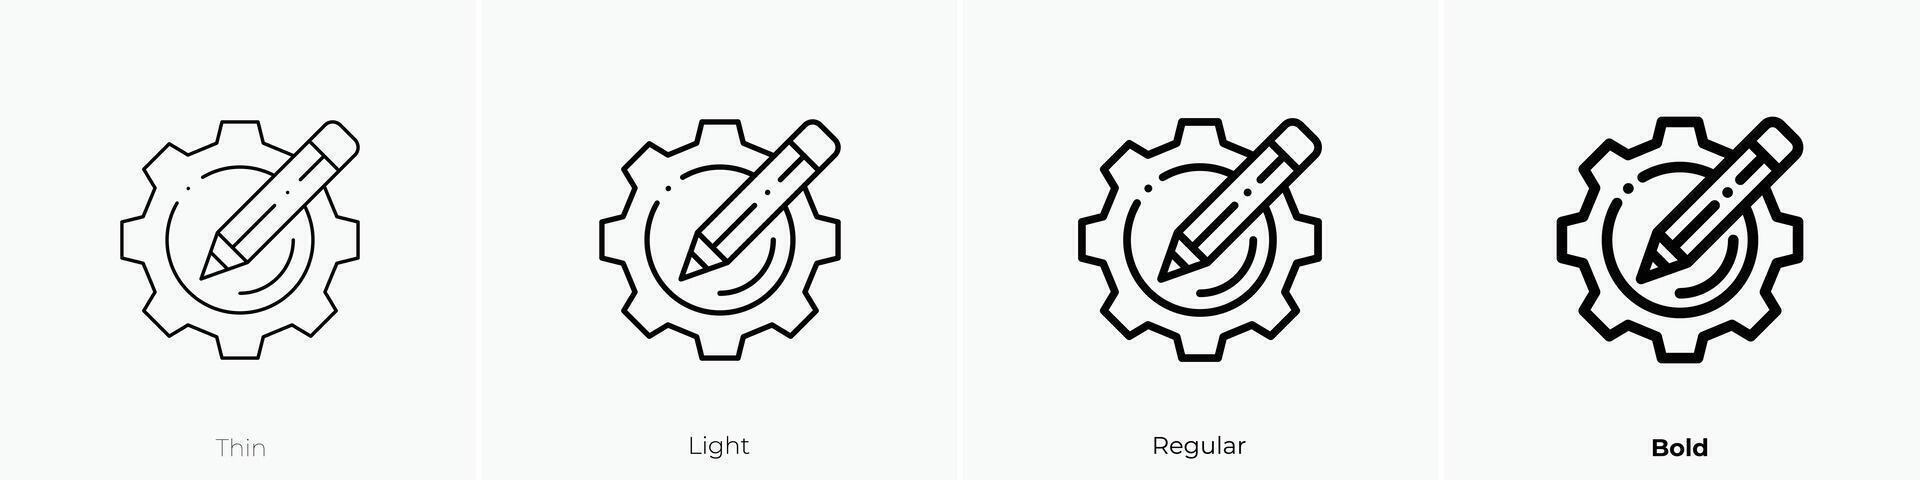 optimization icon. Thin, Light, Regular And Bold style design isolated on white background vector